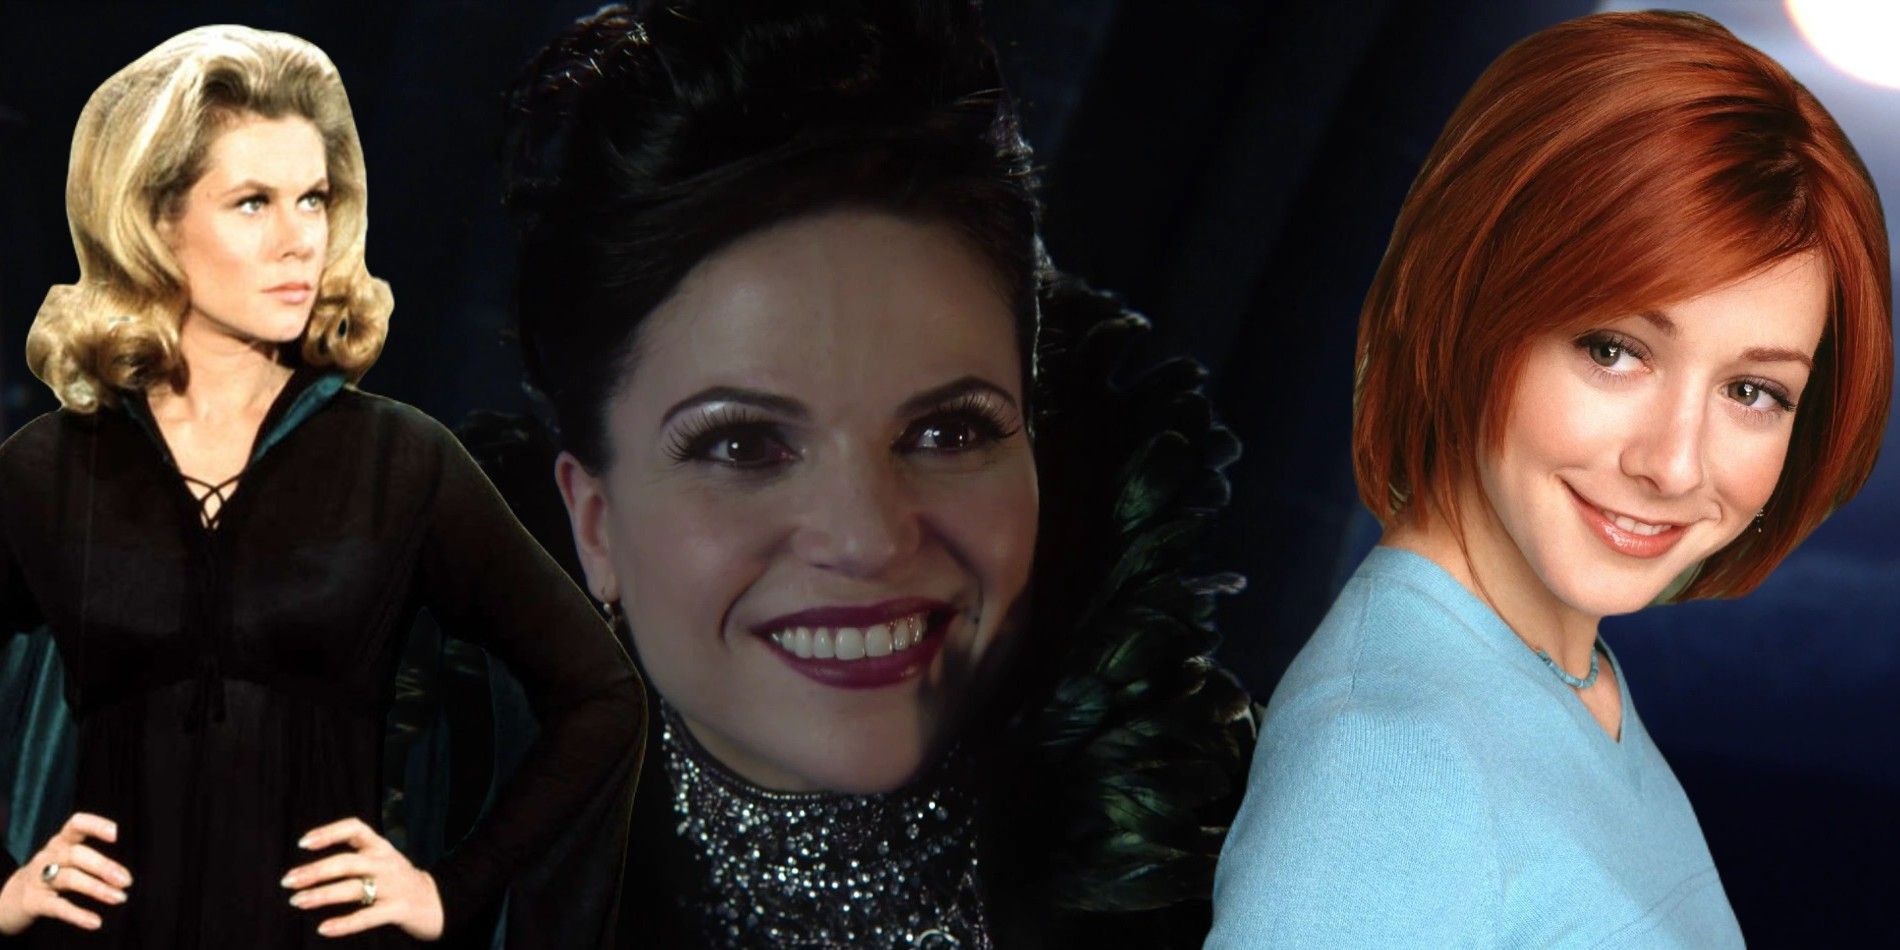 Samantha Stephens from Bewitched, Regina Mills from Once Upon a Time and Willow Rosenberg from Buffy the Vampire Slayer